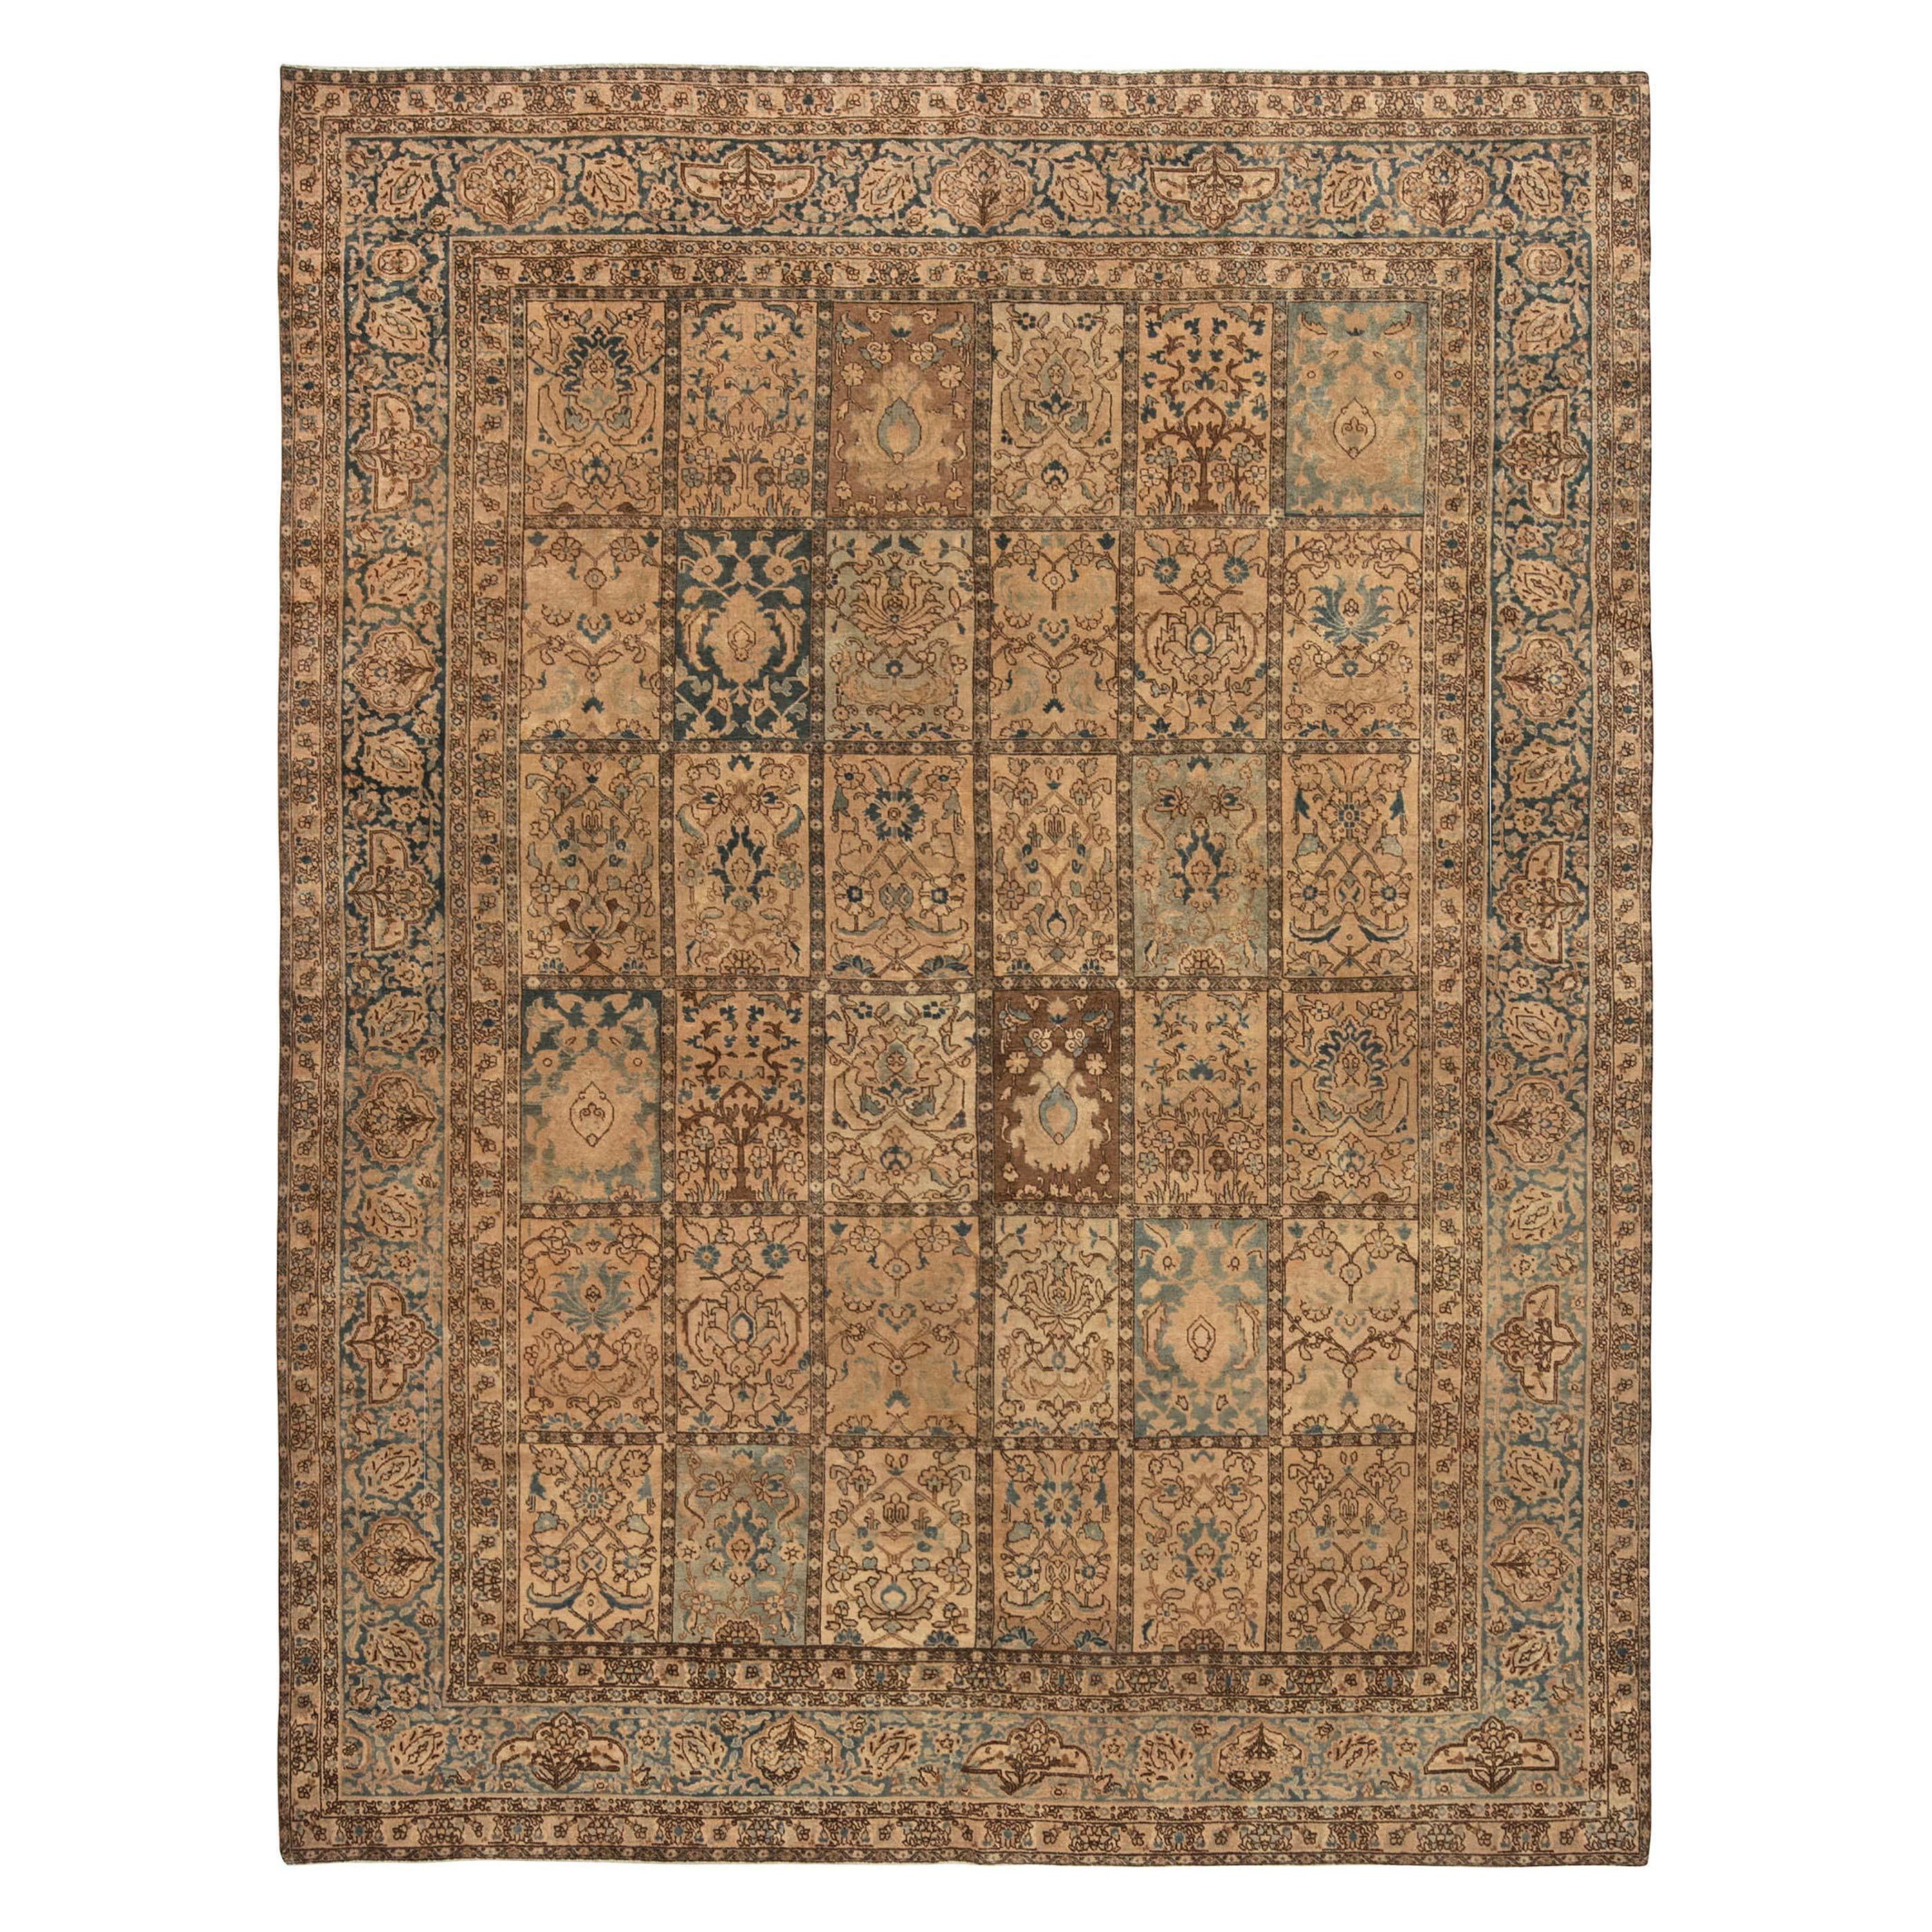 Antique Persian Tabriz Hand Knotted Carpet